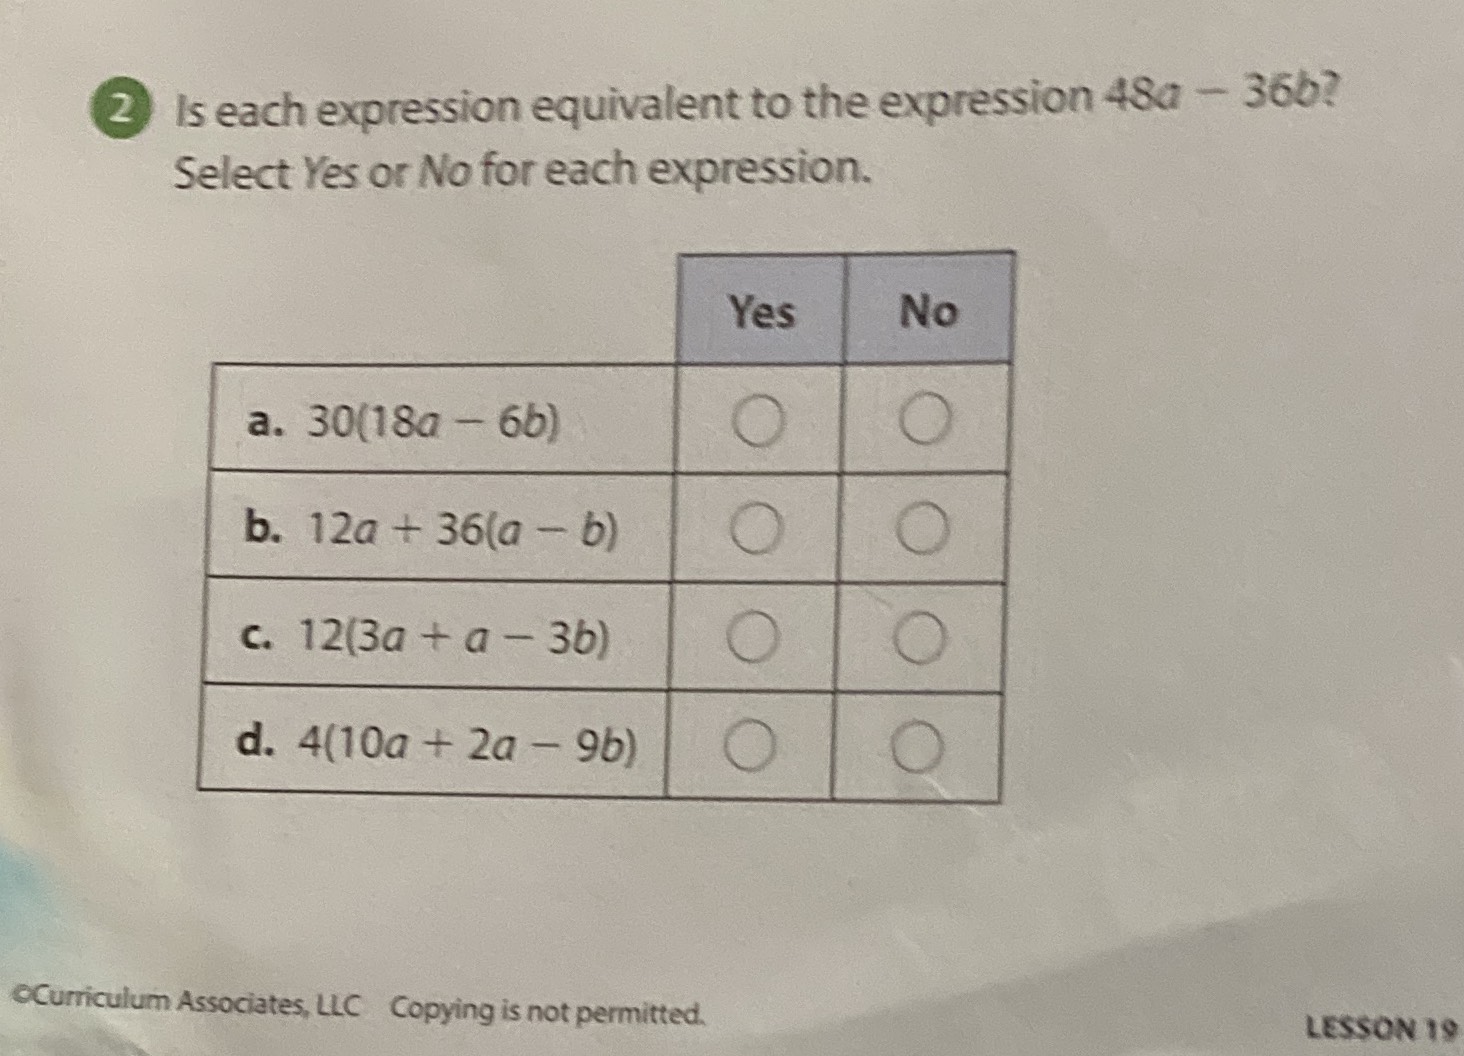 (2) Is each expression equivalent to the expressio...